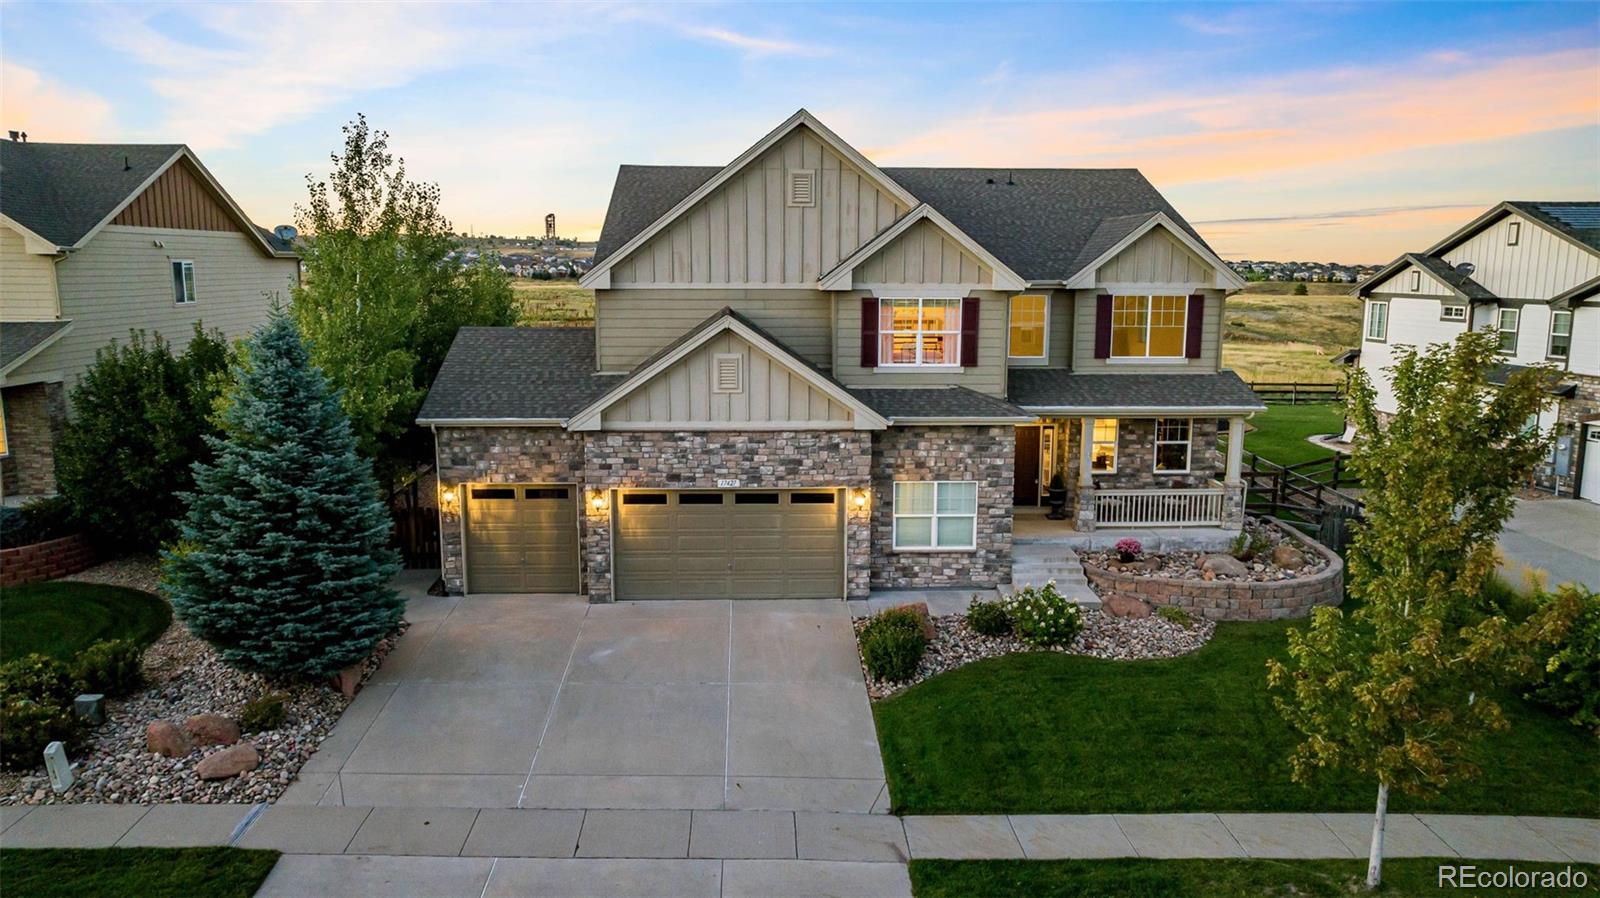 17427 W 78th Drive, arvada MLS: 8844404 Beds: 5 Baths: 4 Price: $1,395,000